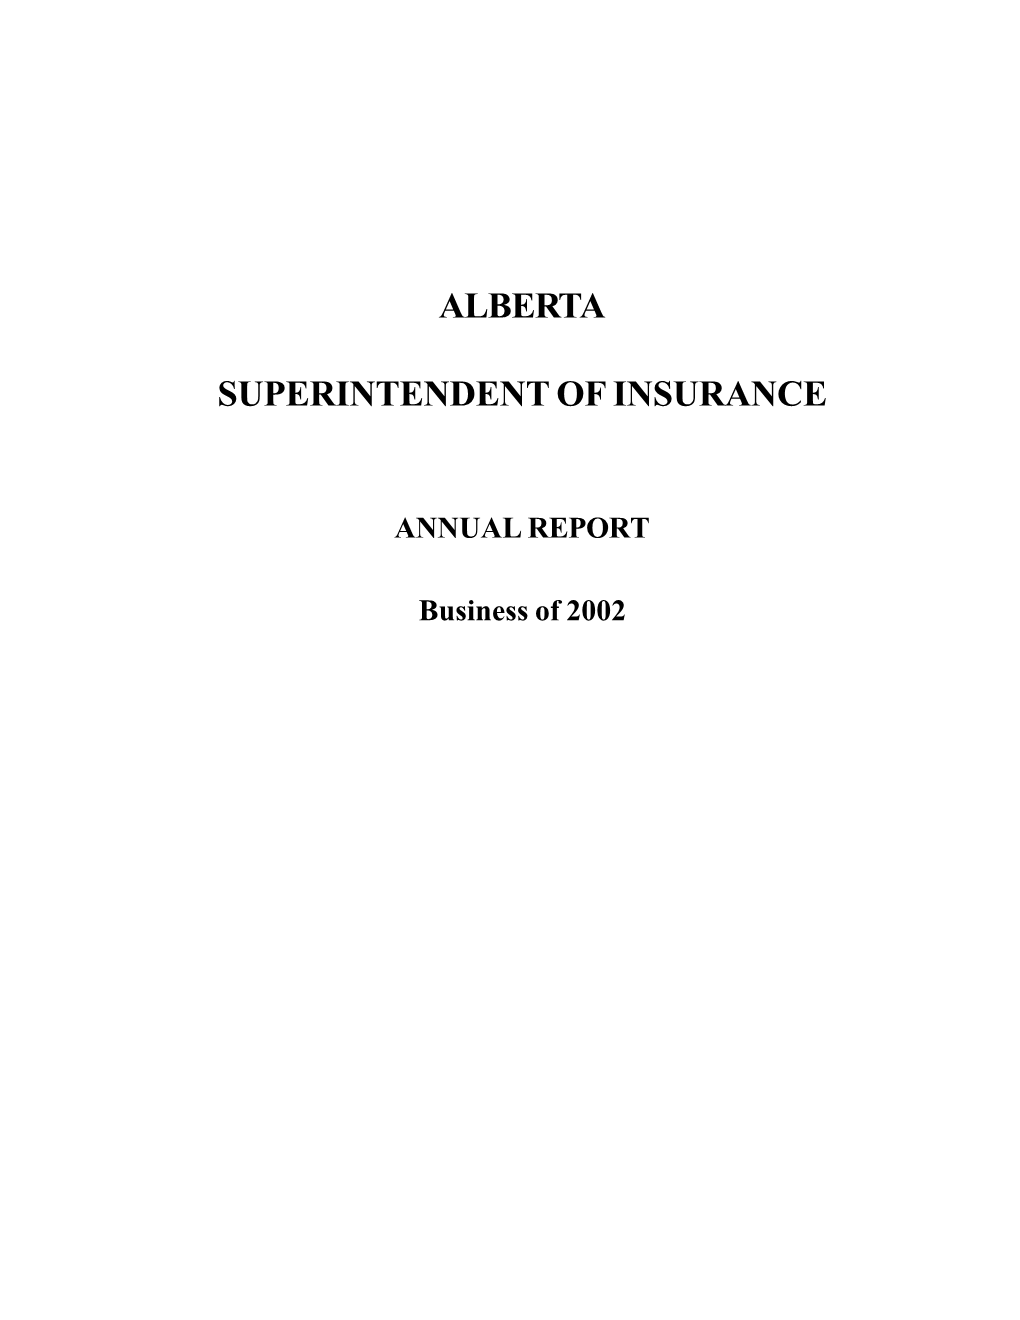 2002 Superintendent of Insurance Annual Report